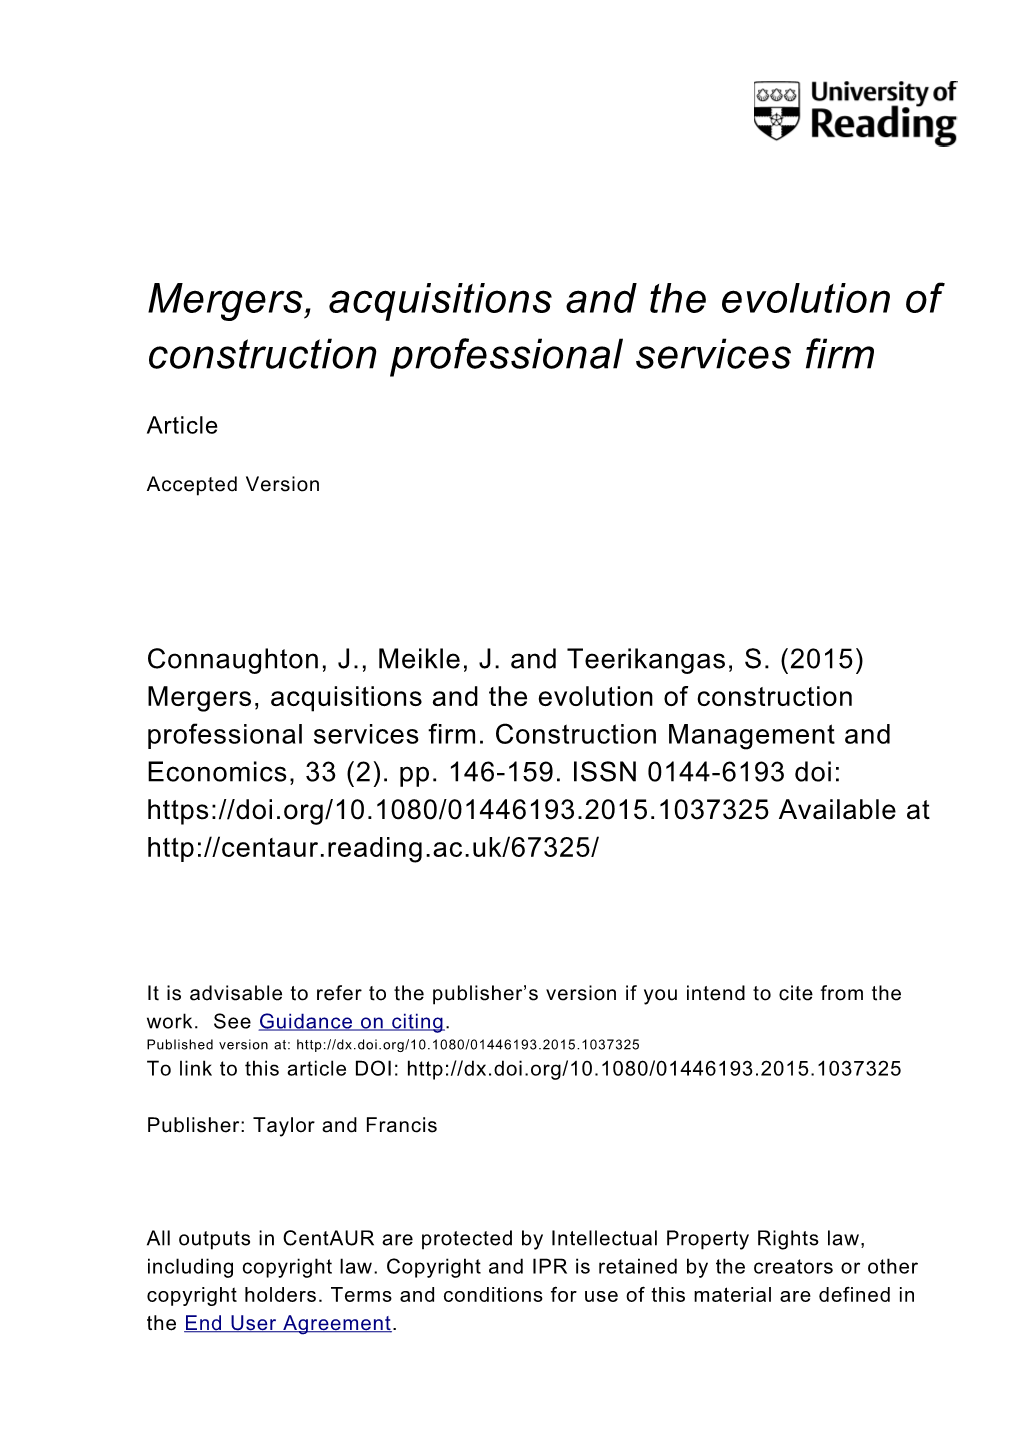 Mergers, Acquisitions and the Evolution of Construction Professional Services Firm